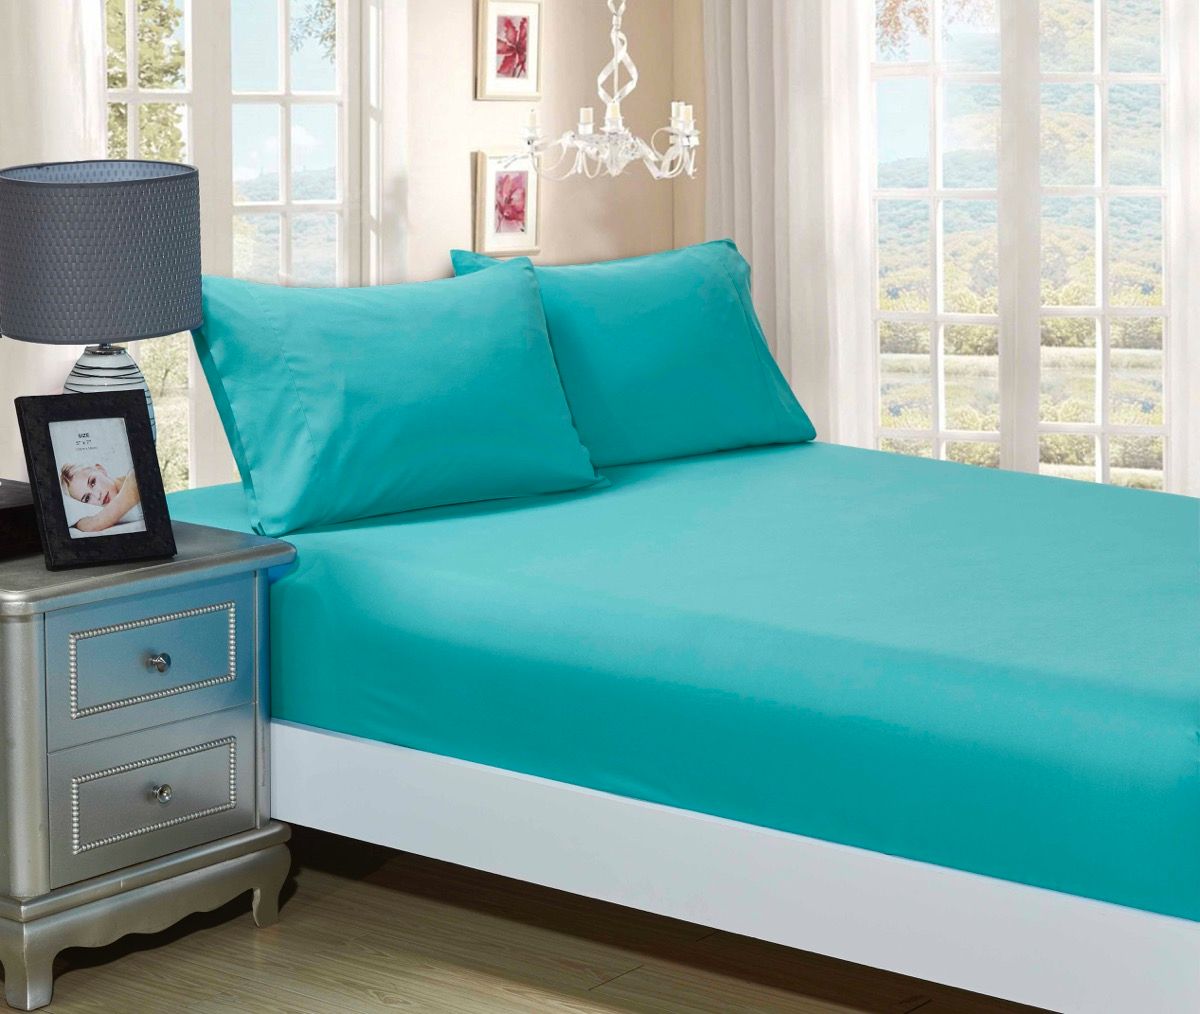 Super Soft 3-Piece Queen Size Bed Fitted Sheet & 2 Pillowcases Set - Teal